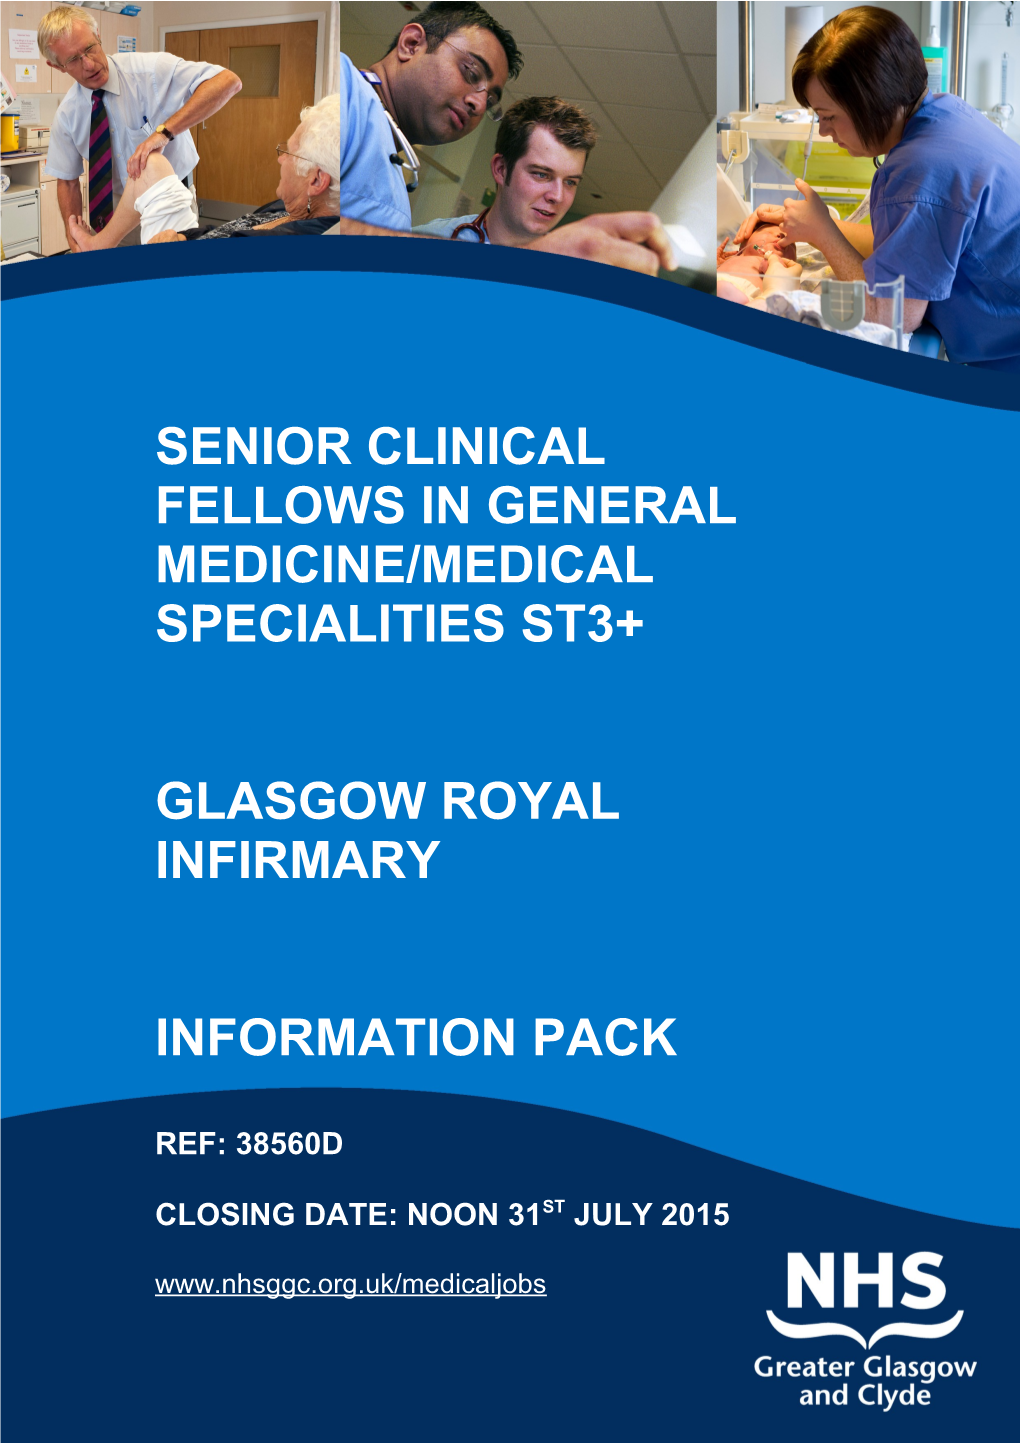 Senior Clinical Fellows in General Medicine/Medical Specialities St3+